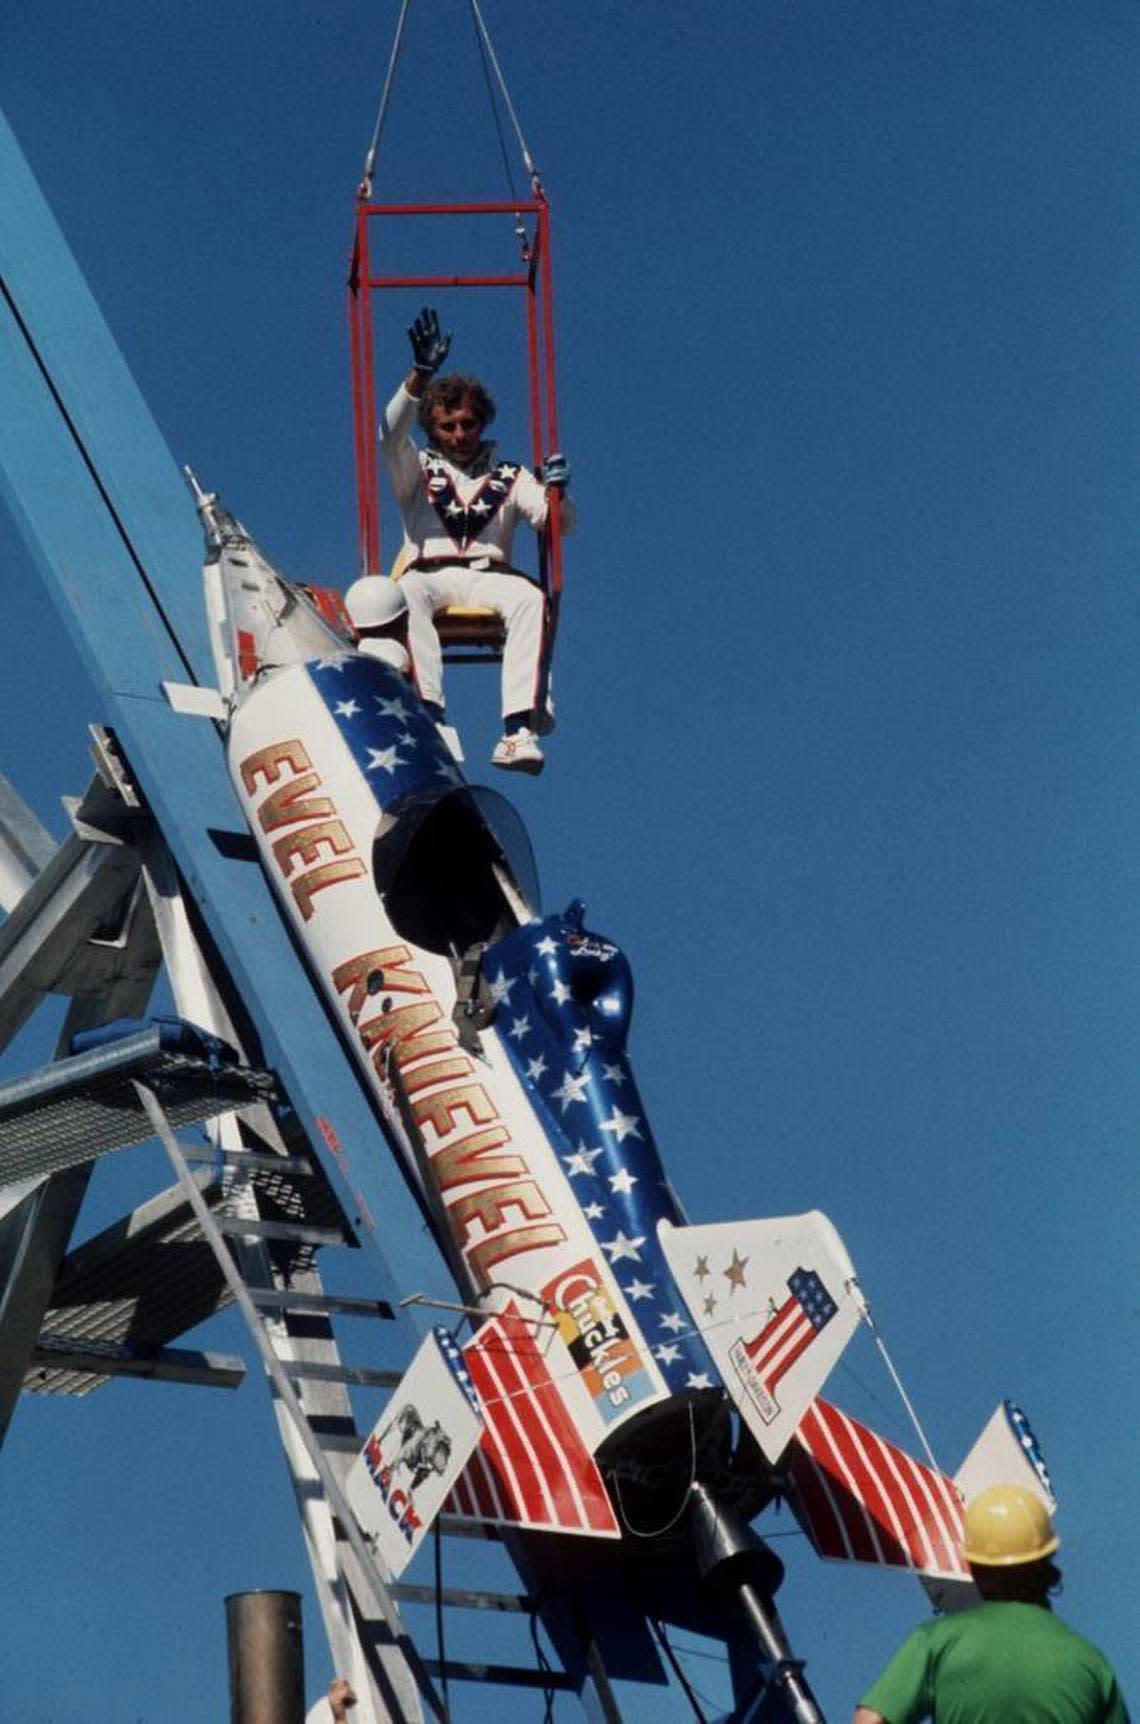 Evel Knievel waves as he is lowered into his rocket in this Sept. 8, 1974, file photo before his failed attempt at a highly promoted 3/4-mile leap across the Snake River Canyon outside Twin Falls.